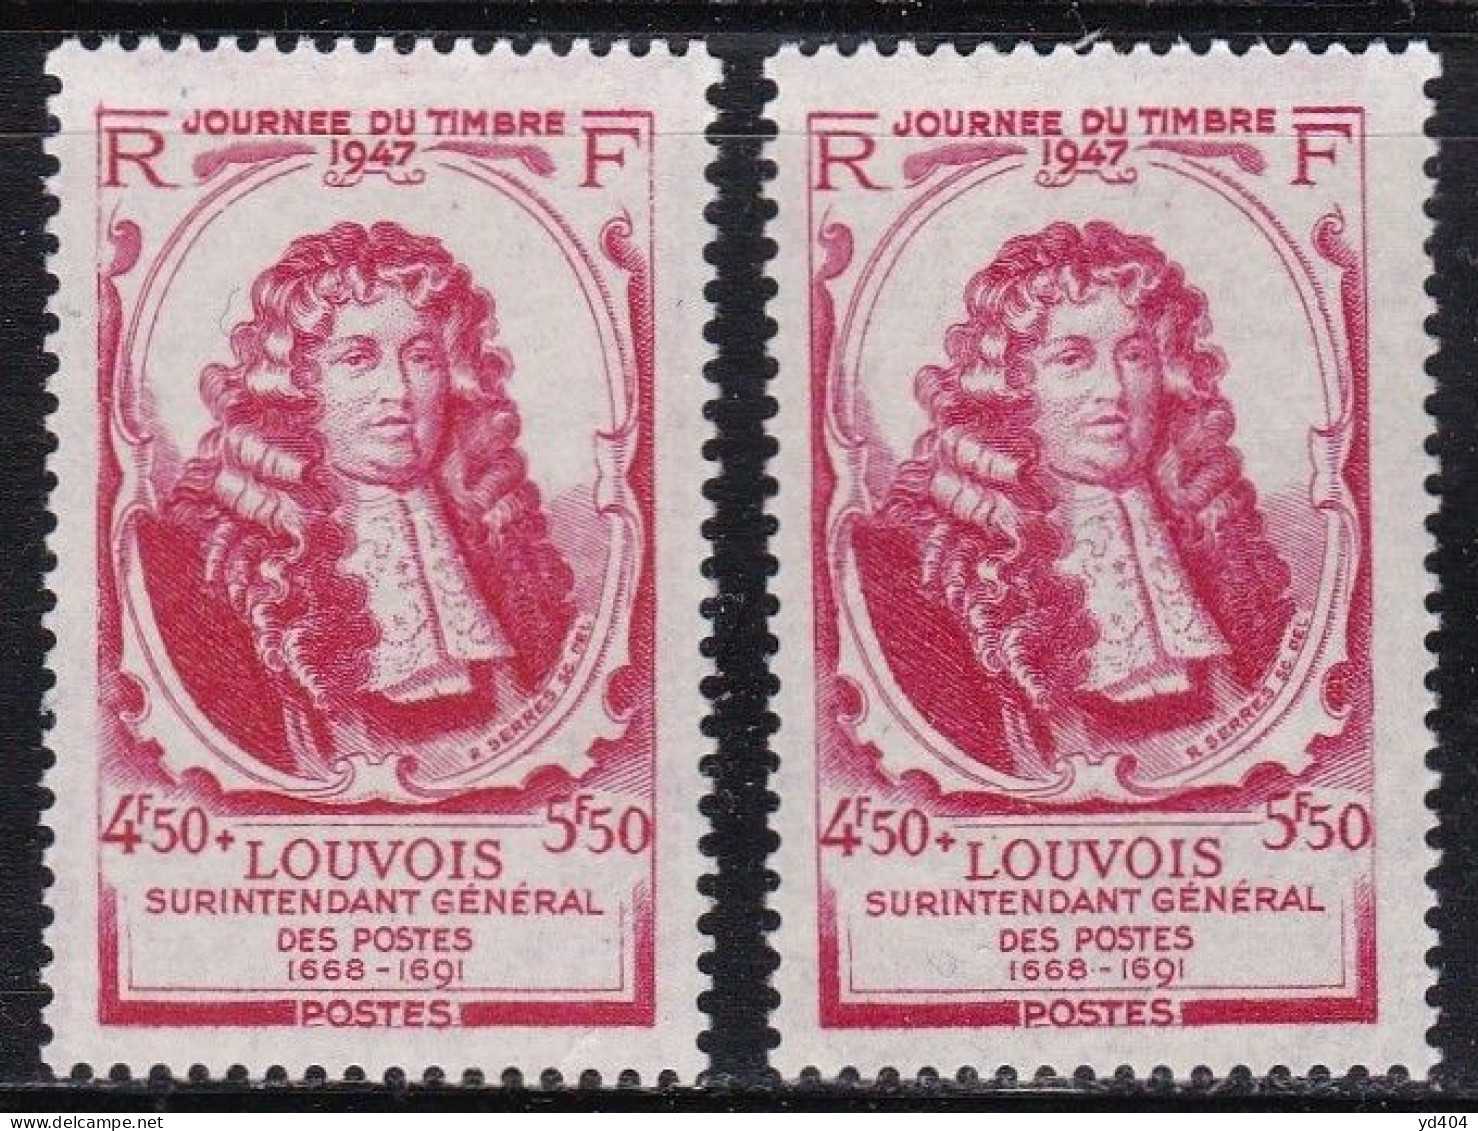 FR7139D - FRANCE – 1947 – POST DAY - Y&T # 779(x2) MNH - Unused Stamps